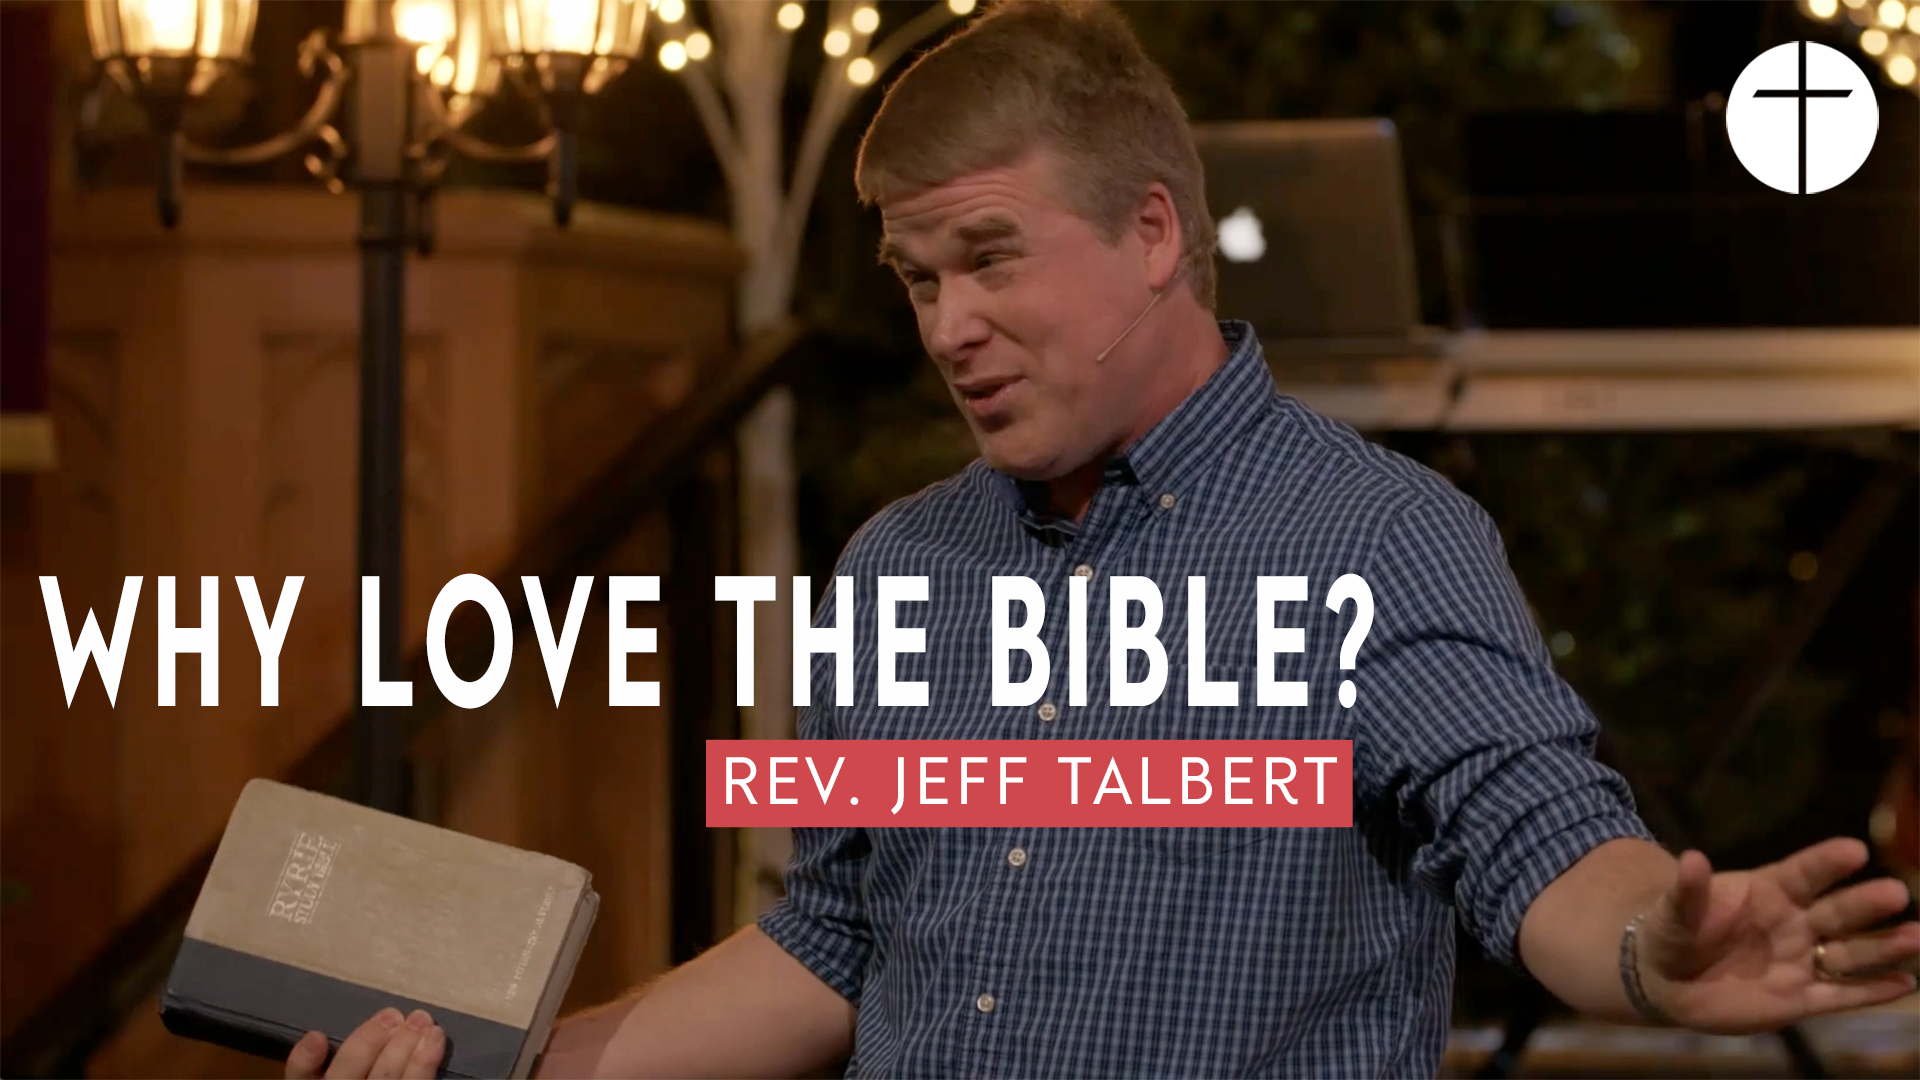 Why Love the Bible? Image